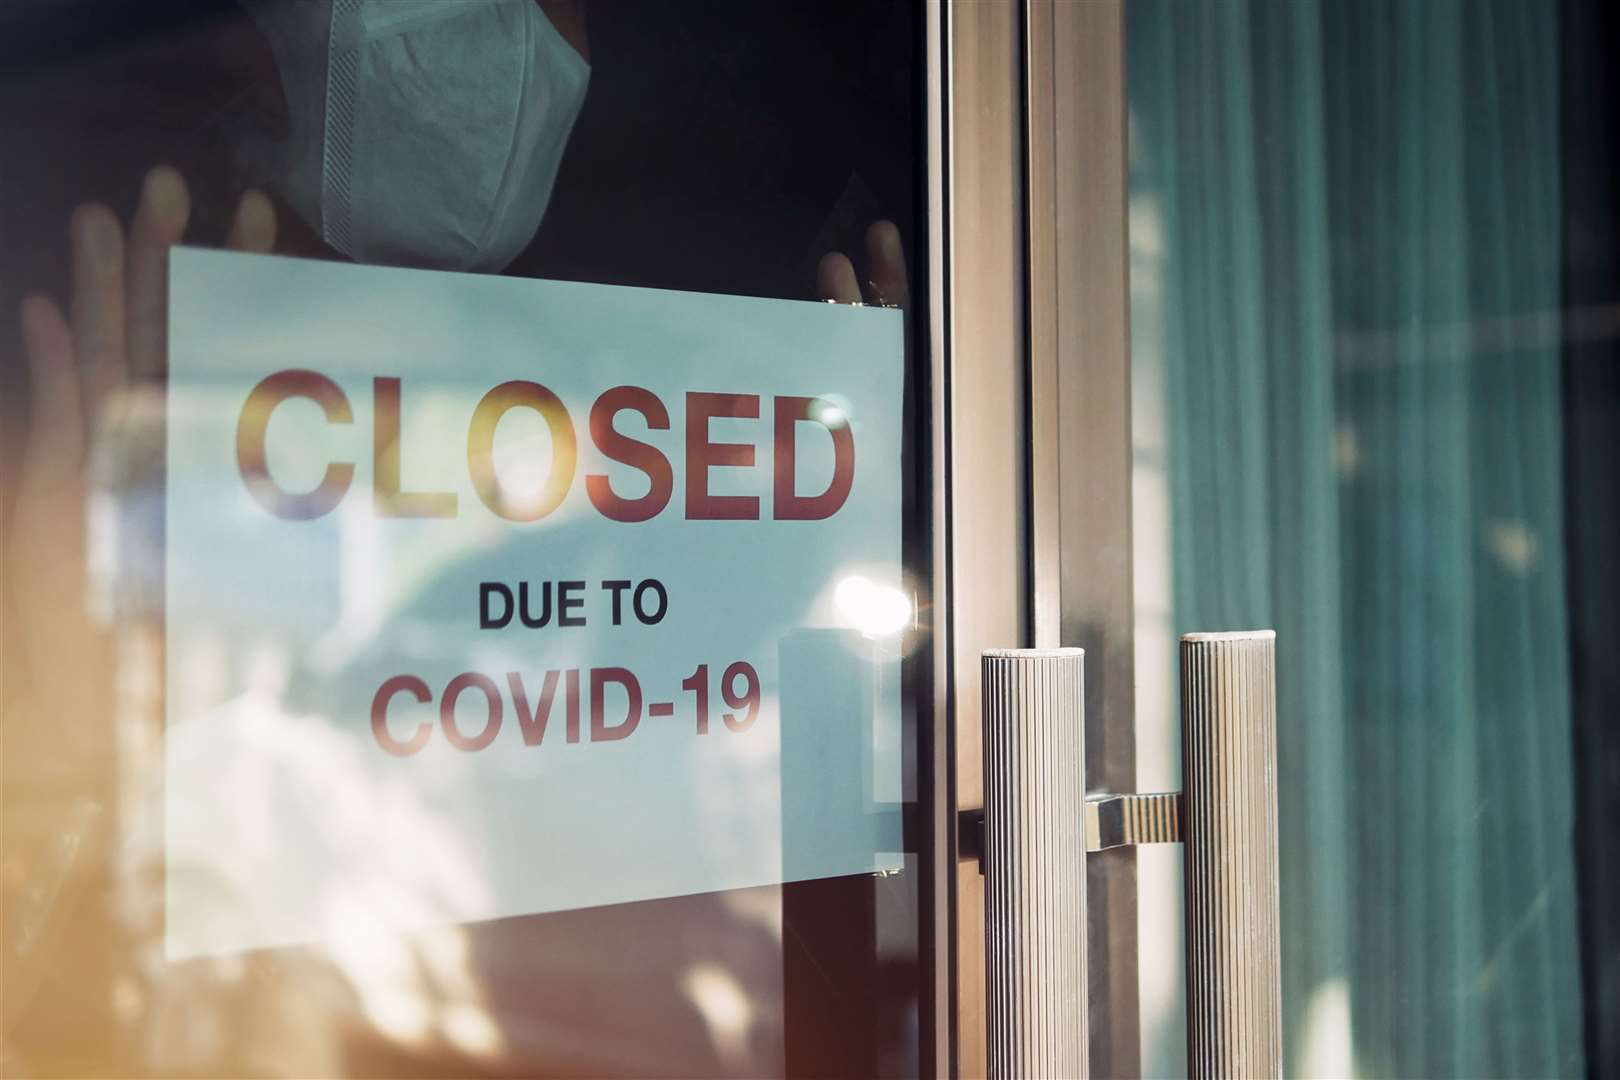 Businesses have been hit by the impact of the coronavirus and resulting lockdown